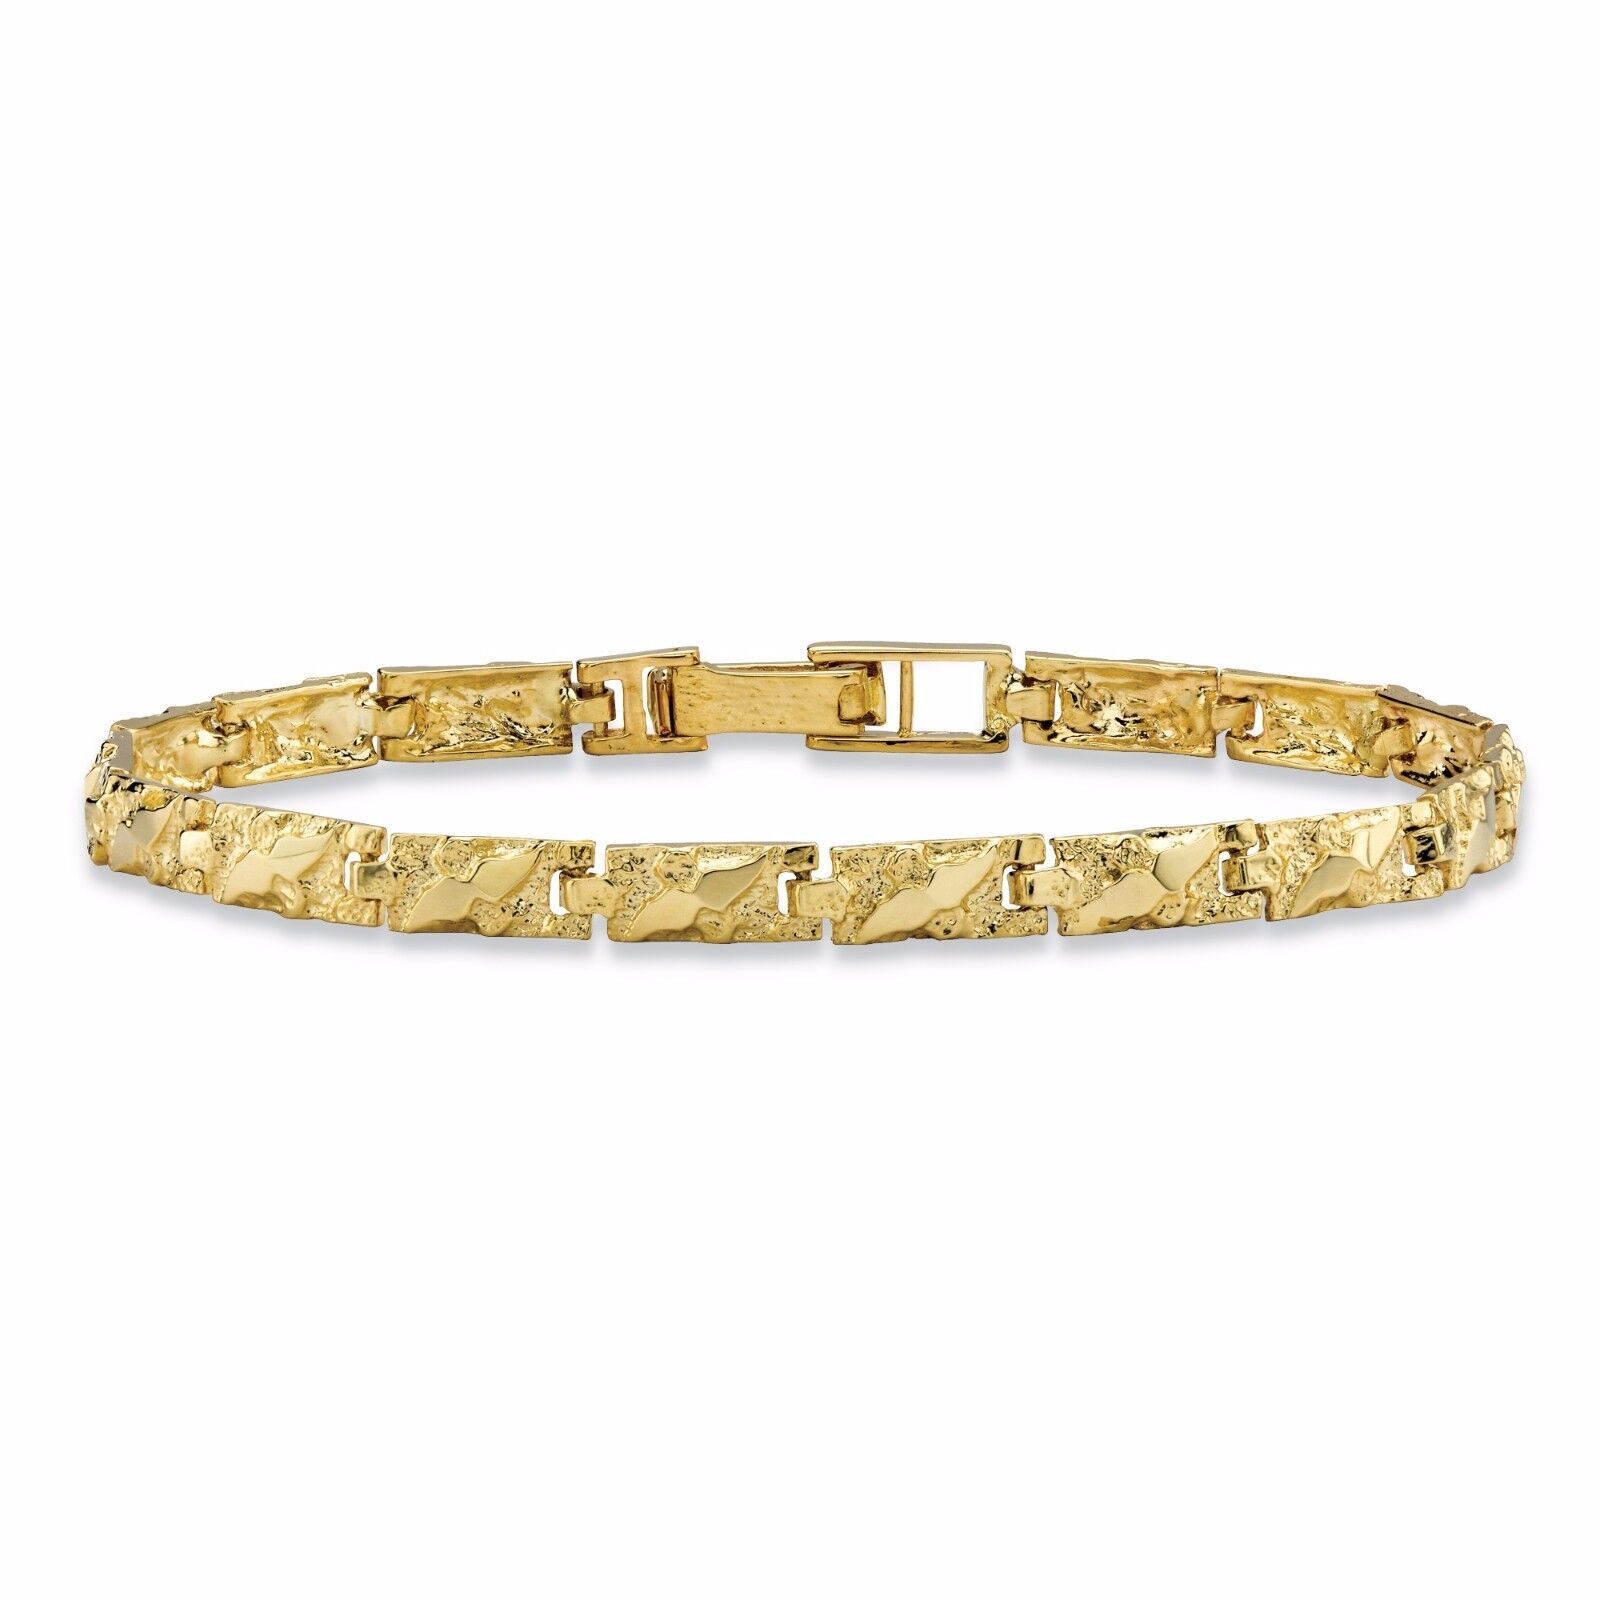 Primary image for WOMENS DIAMOND CUT TEXTURED NUGGET 10K GOLD 7" BRACELET